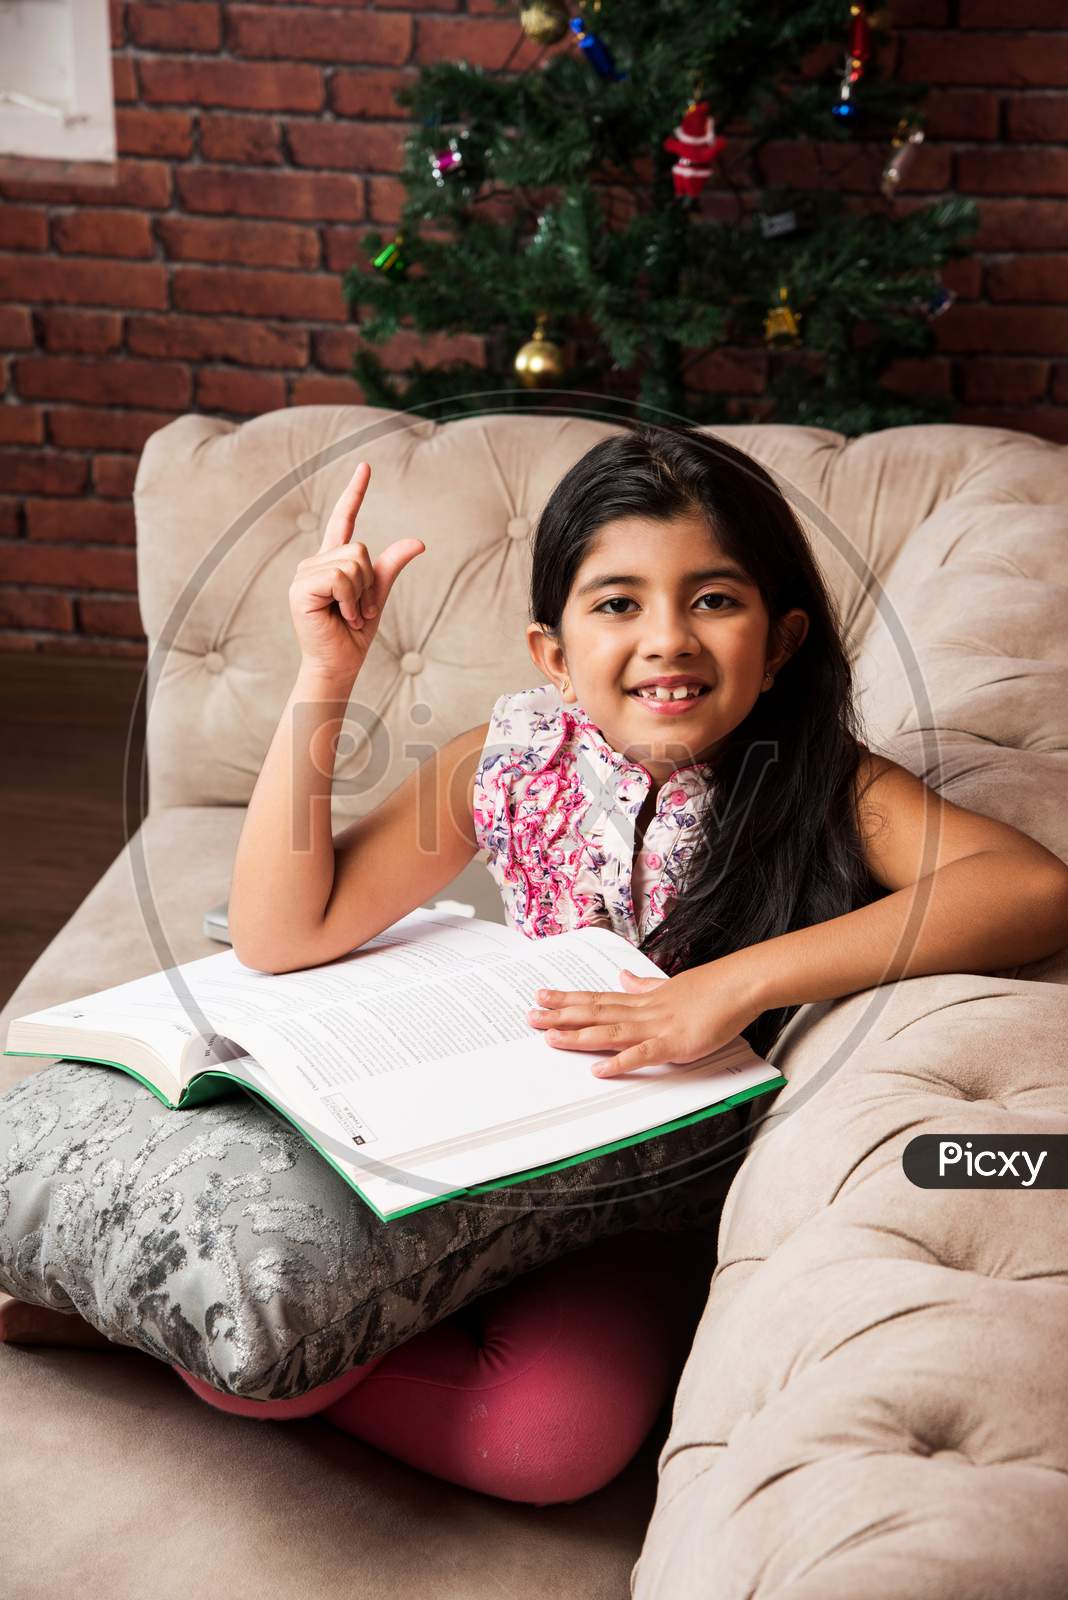 Cute little Indian/asian girl reading book while sitting sofa or couch at home